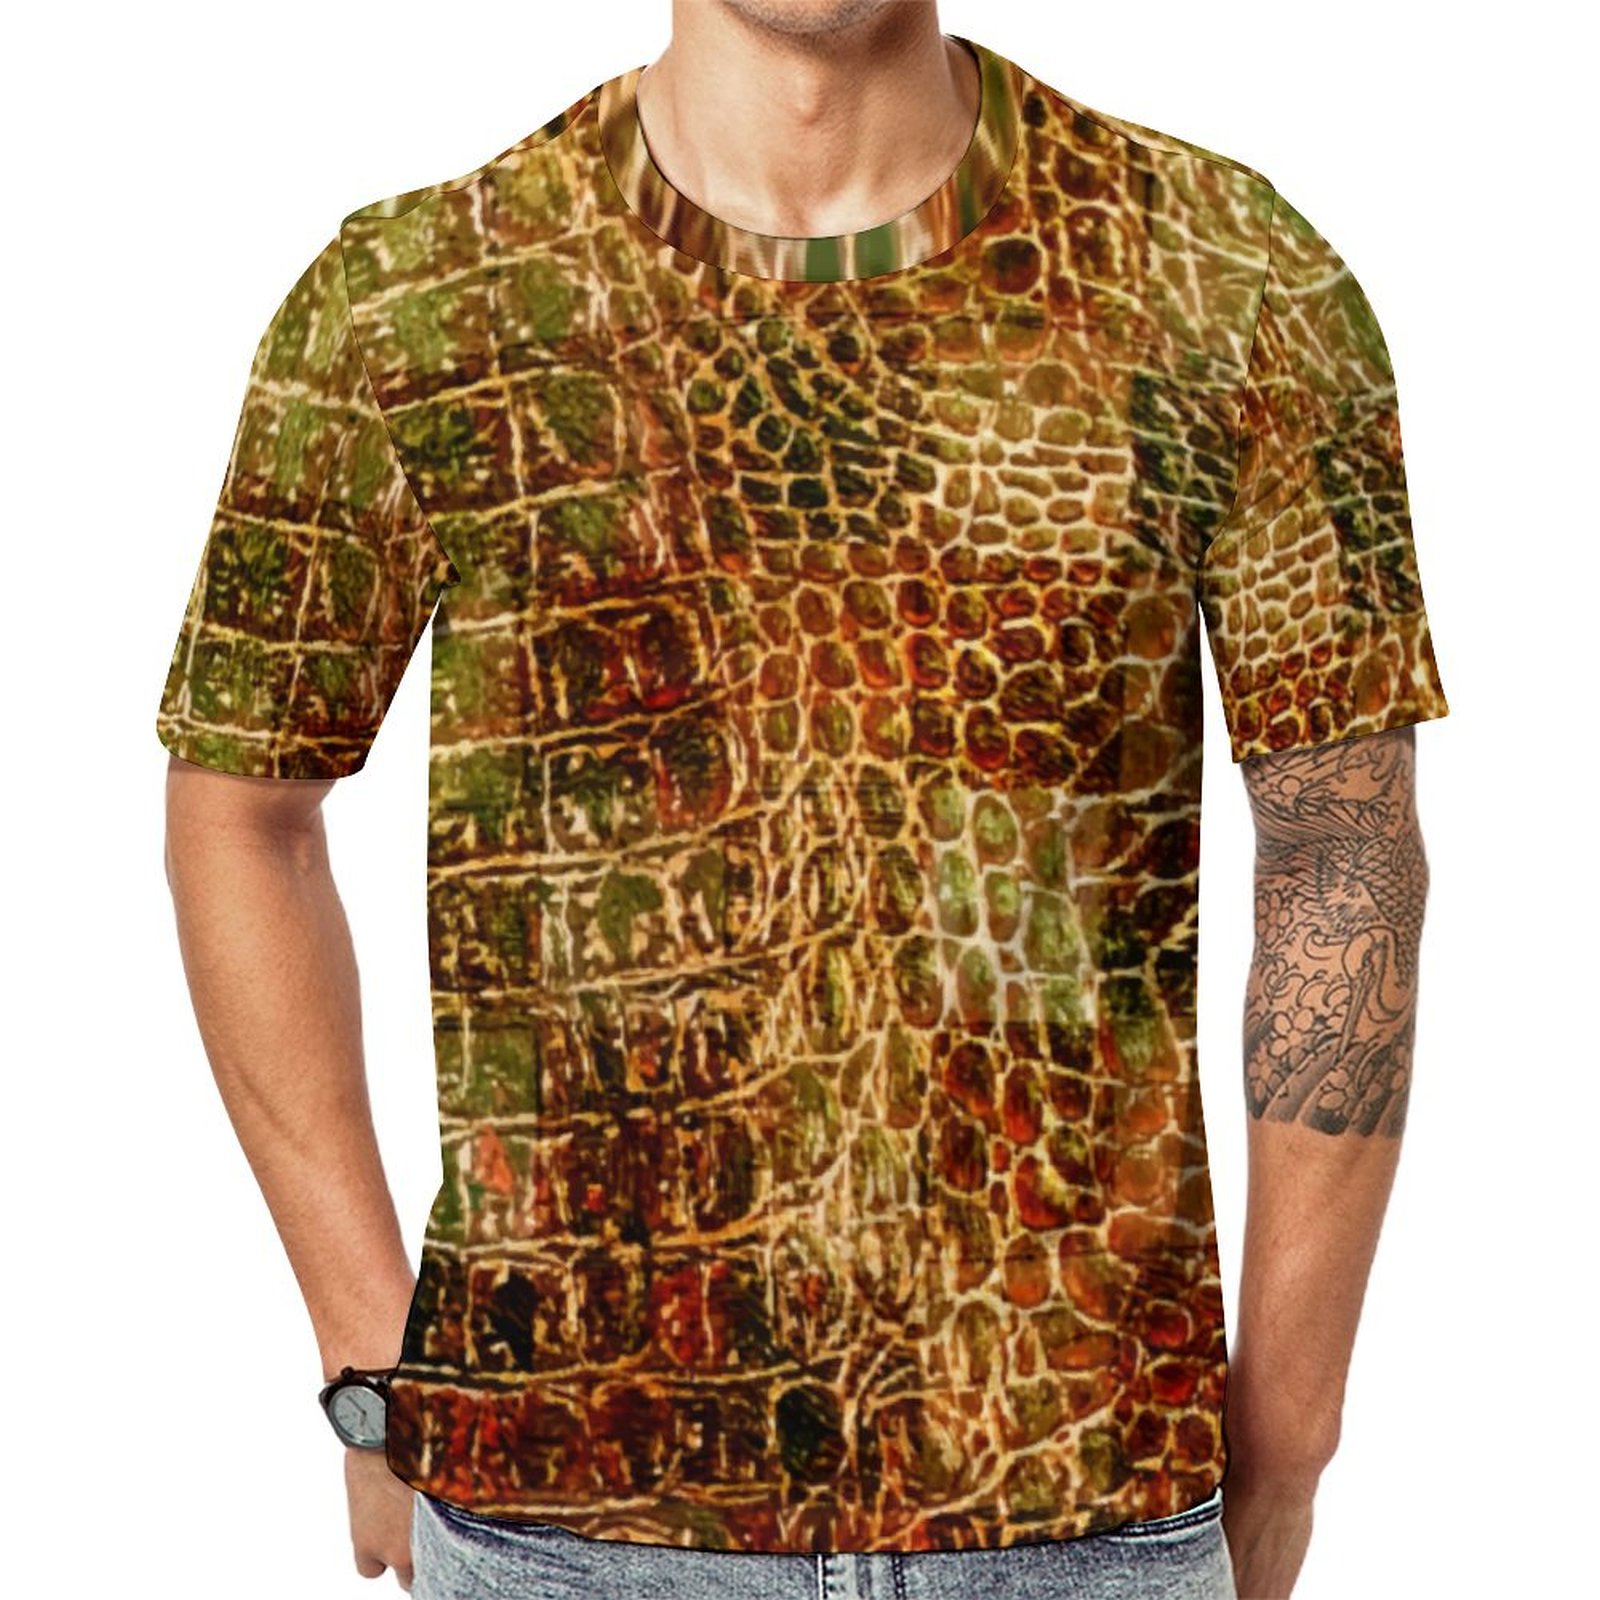 Faux Alligator Animal Skin Leather Red Brown Short Sleeve Print Unisex Tshirt Summer Casual Tees for Men and Women Coolcoshirts